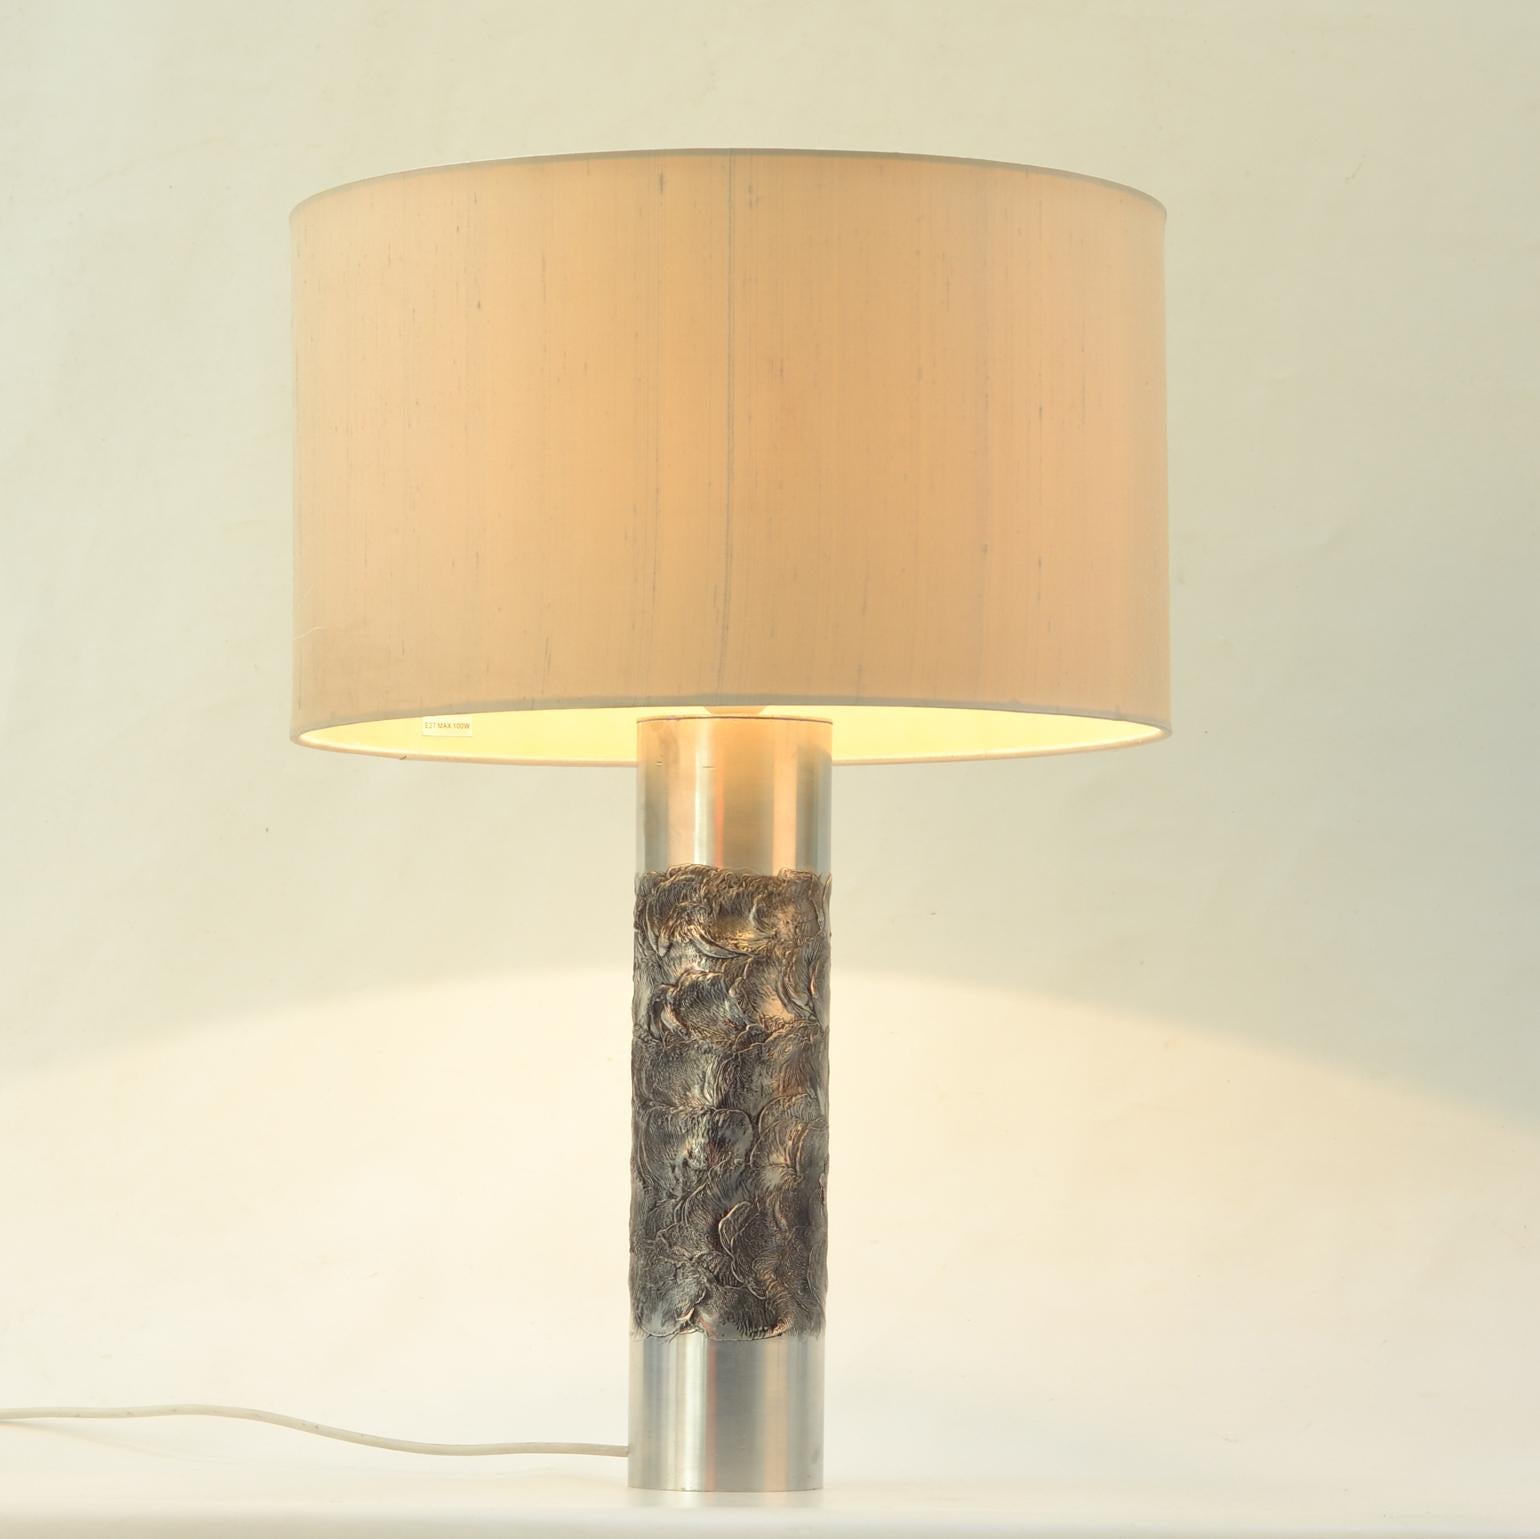 Pair of Brutalist Aluminum Table Lamp by Willy Luyckx, Aluclair, 1960's In Excellent Condition For Sale In London, GB